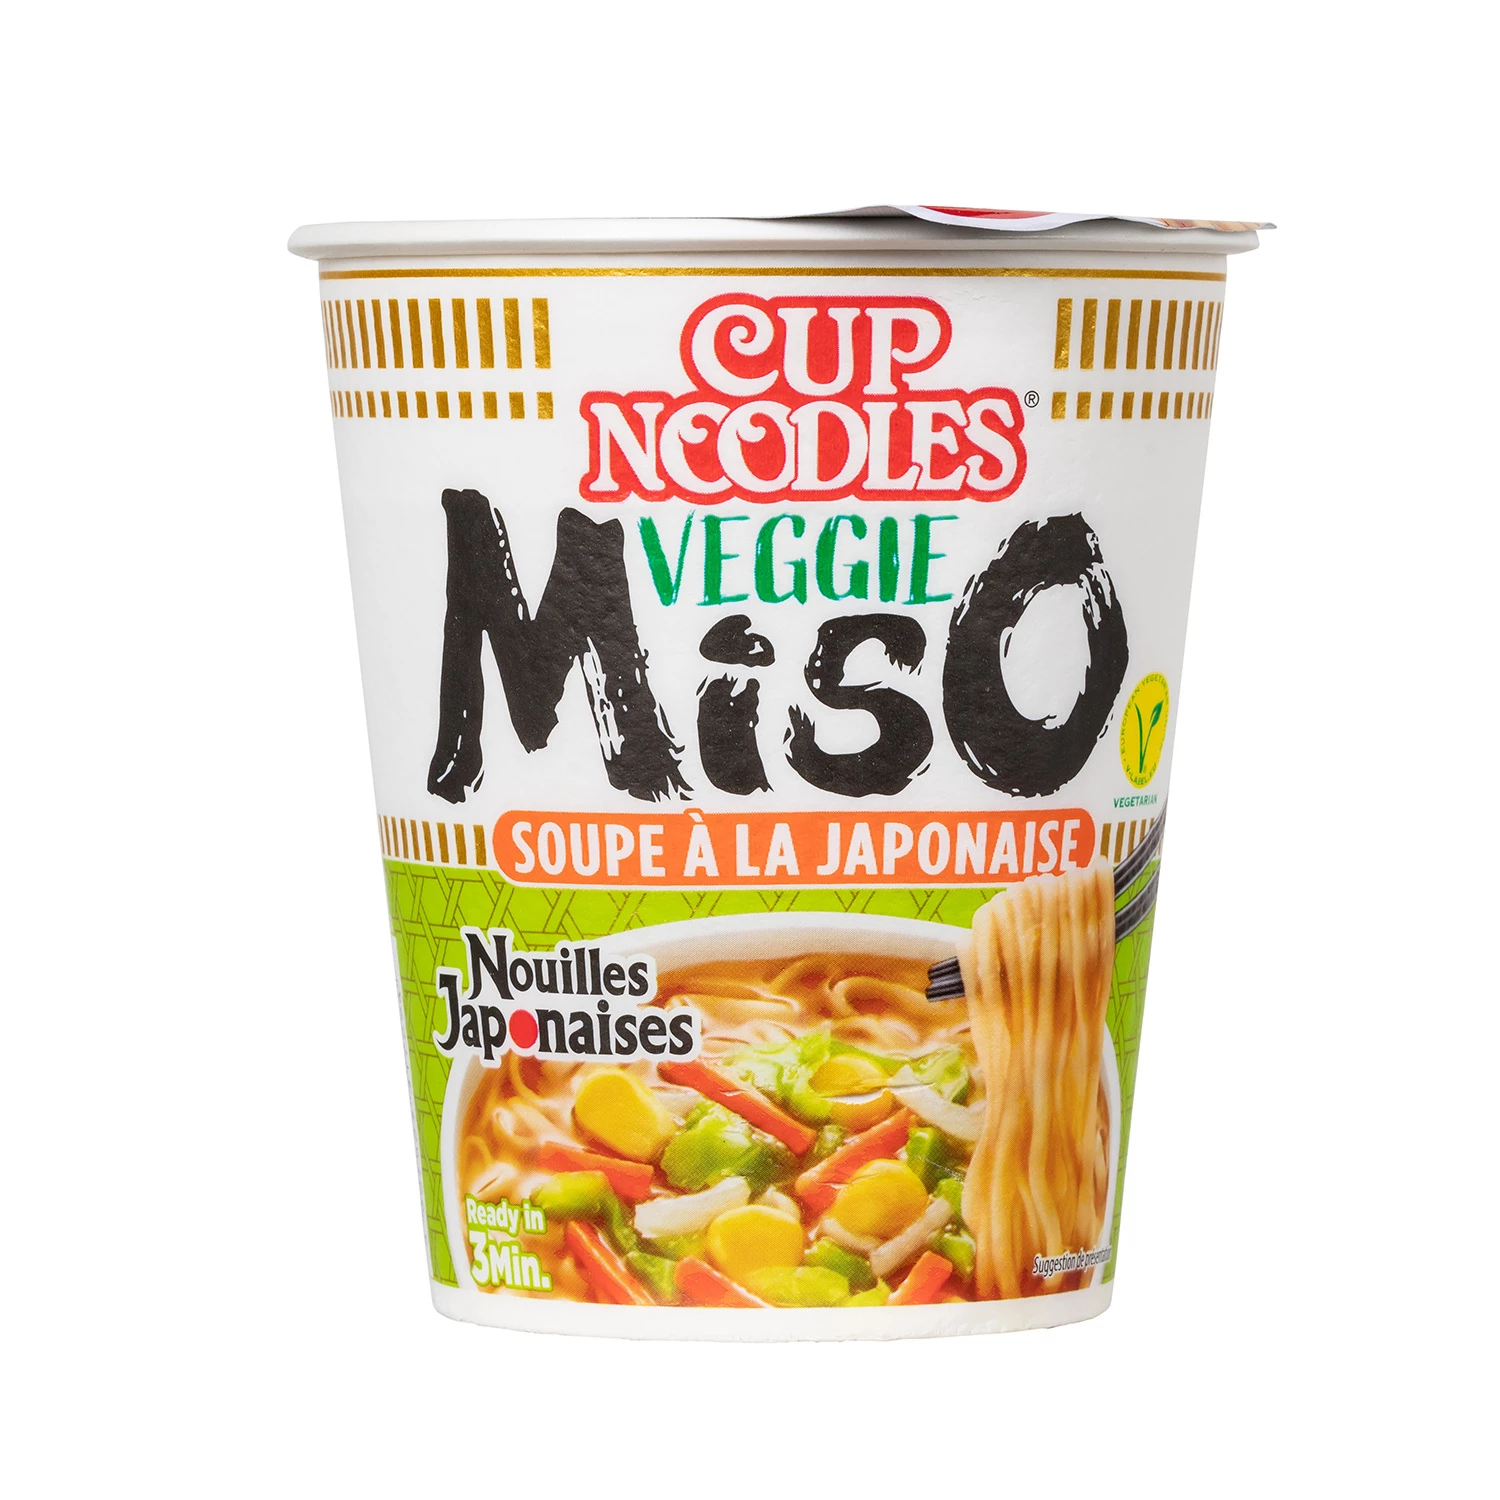 Cup noodles dal sapore miso-vegetariano - NISSIN